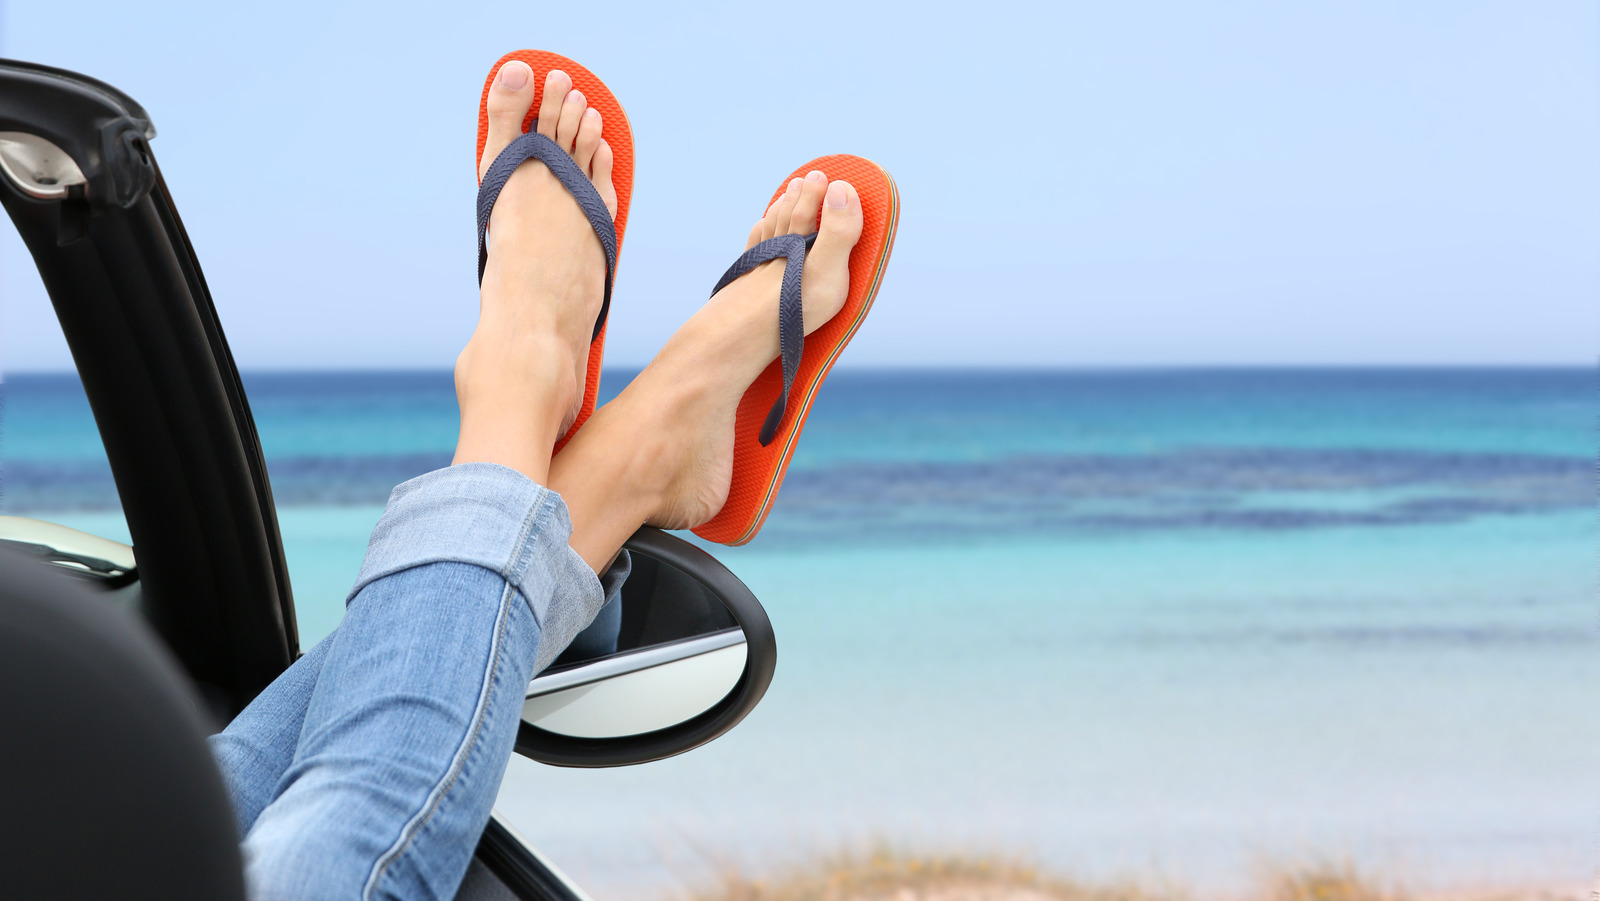 Why You Really Should Never Drive While Wearing Flip-Flops